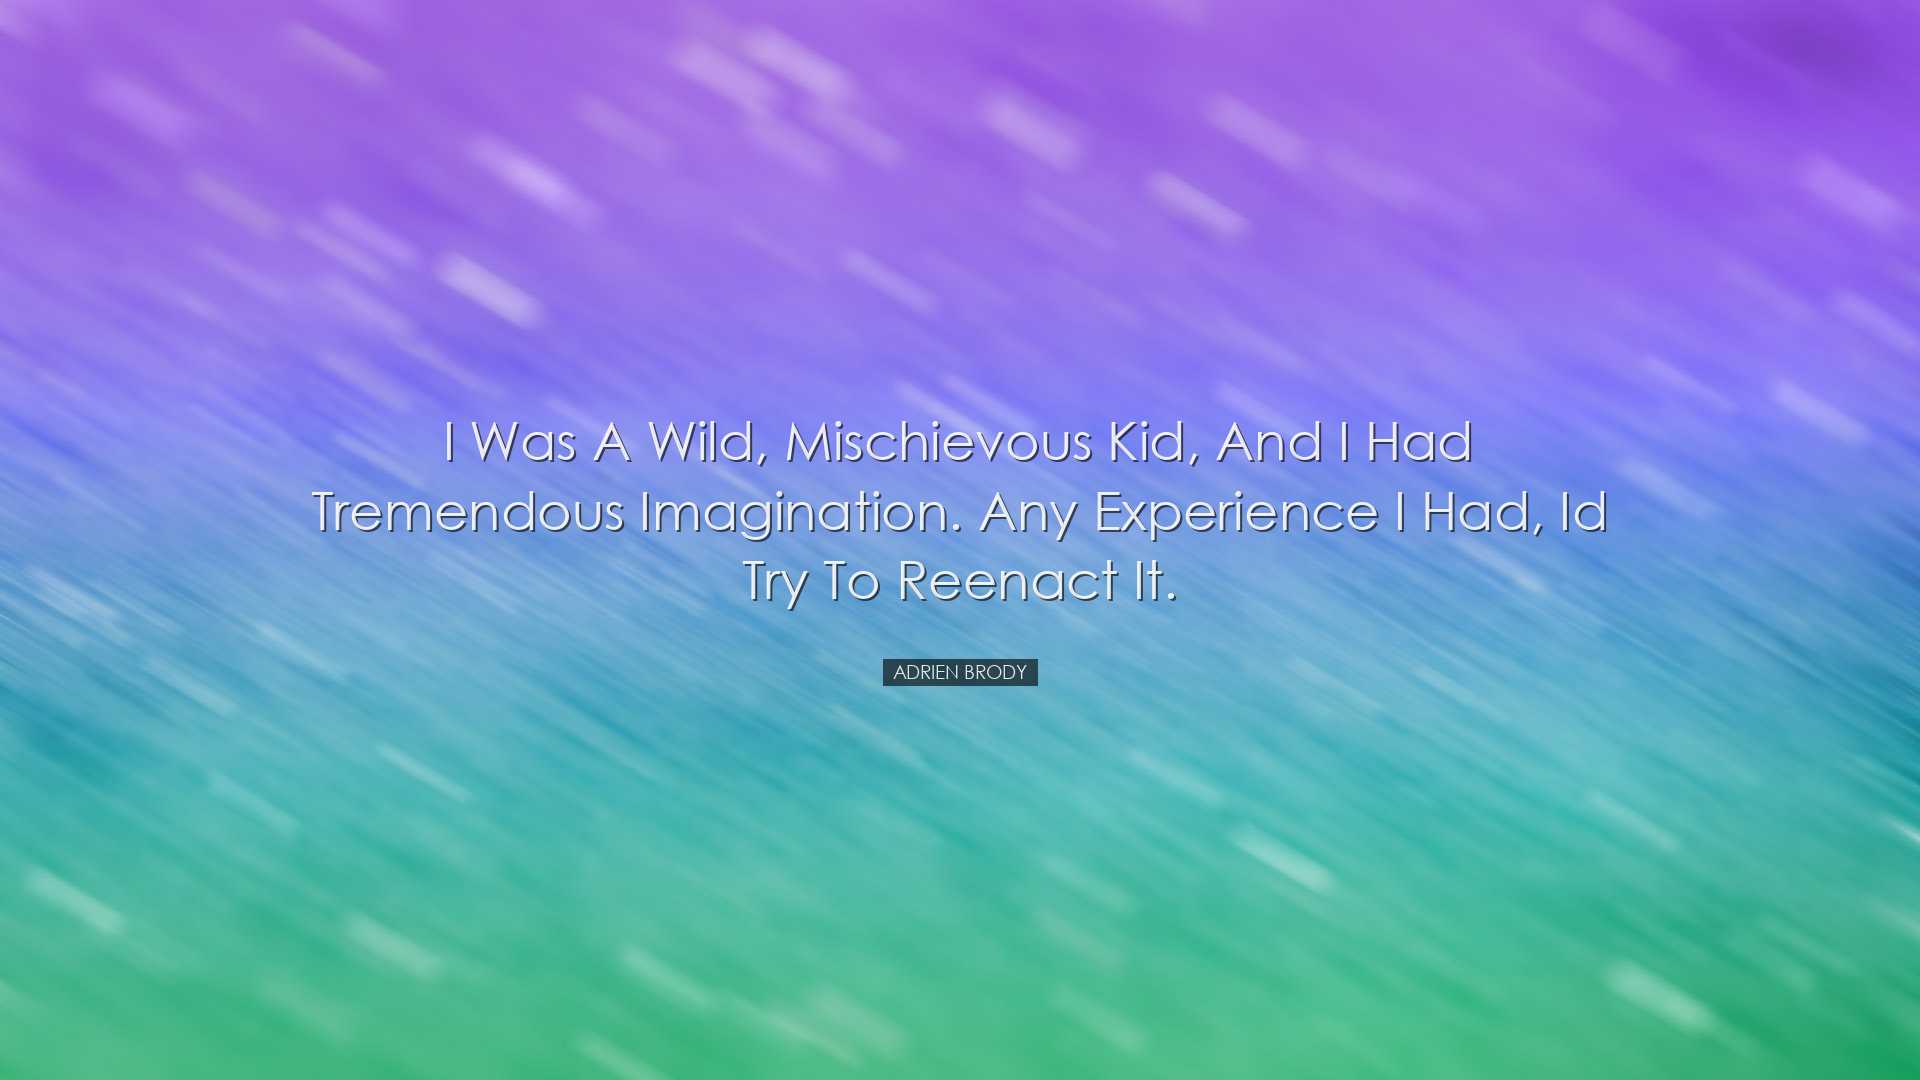 I was a wild, mischievous kid, and I had tremendous imagination. A